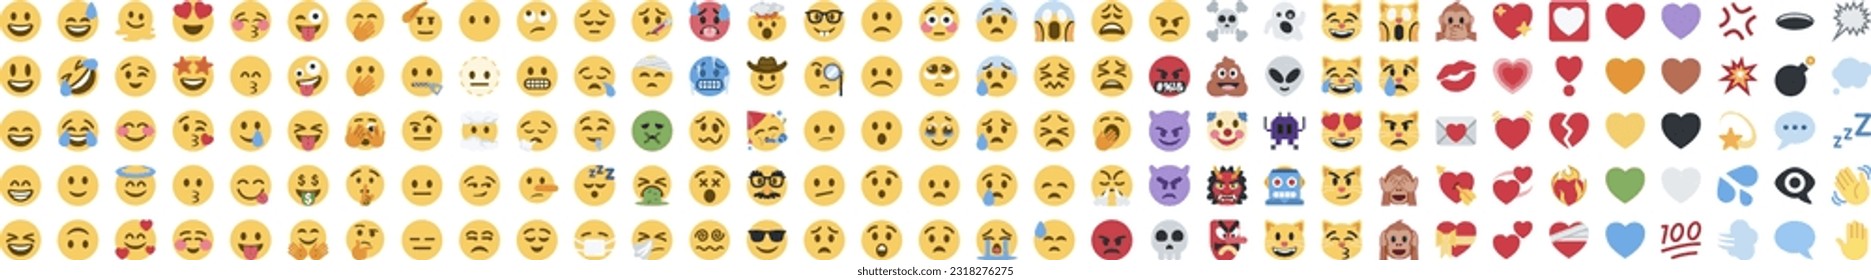 Big set of iOS emoji. Funny emoticons faces with facial expressions. Full editable vector icons. iOS emoji. Detailed emoji icon from the WhatsApp, Facebook, twitter, instagram. svg